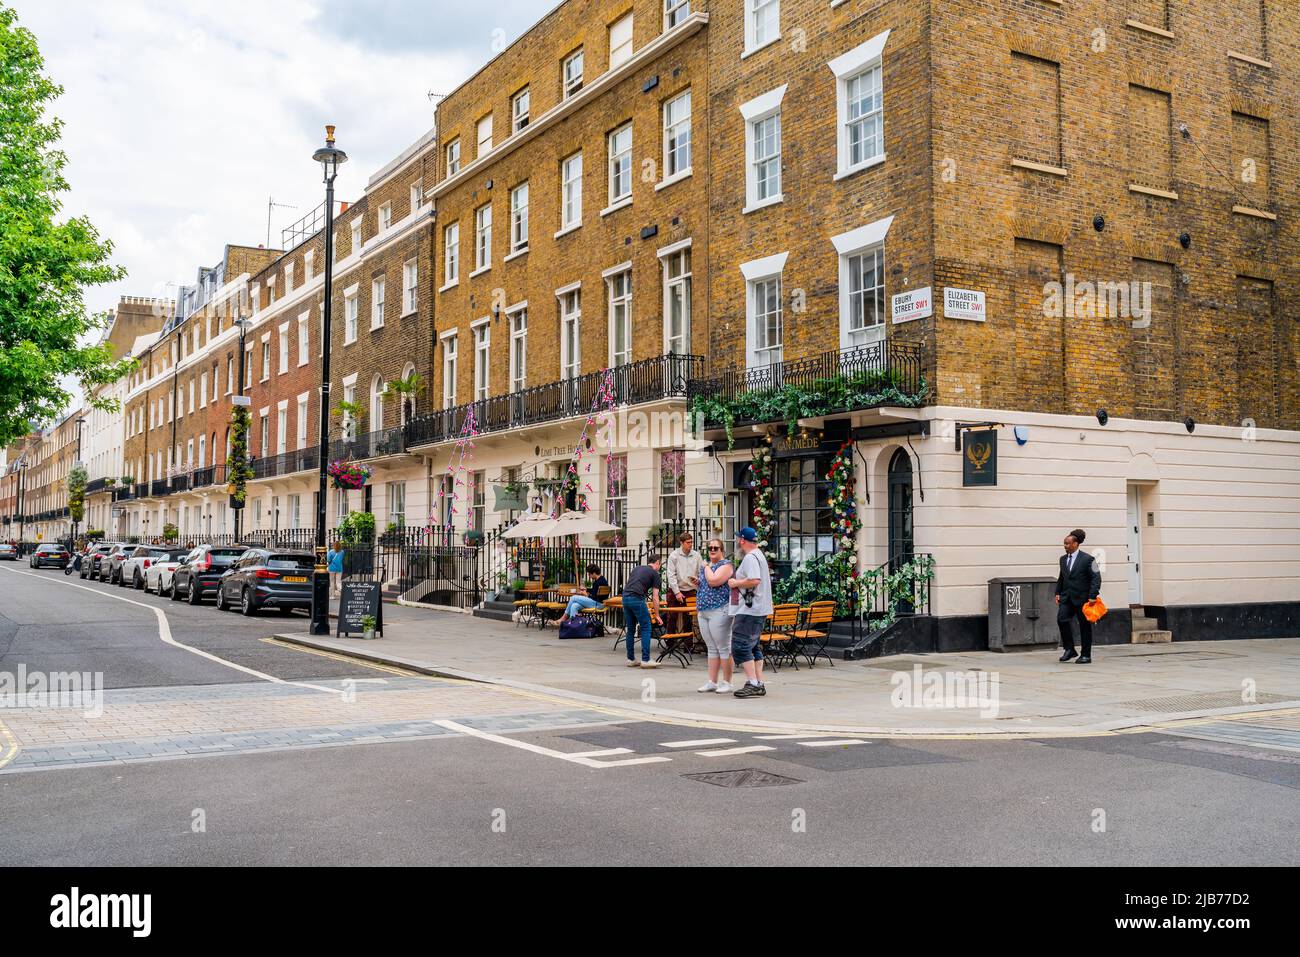 LONDON, UK - JUNE 03, 2022: Street view in Belgravia district, an affluent area known for the smart boutiques and high-end restaurants Stock Photo